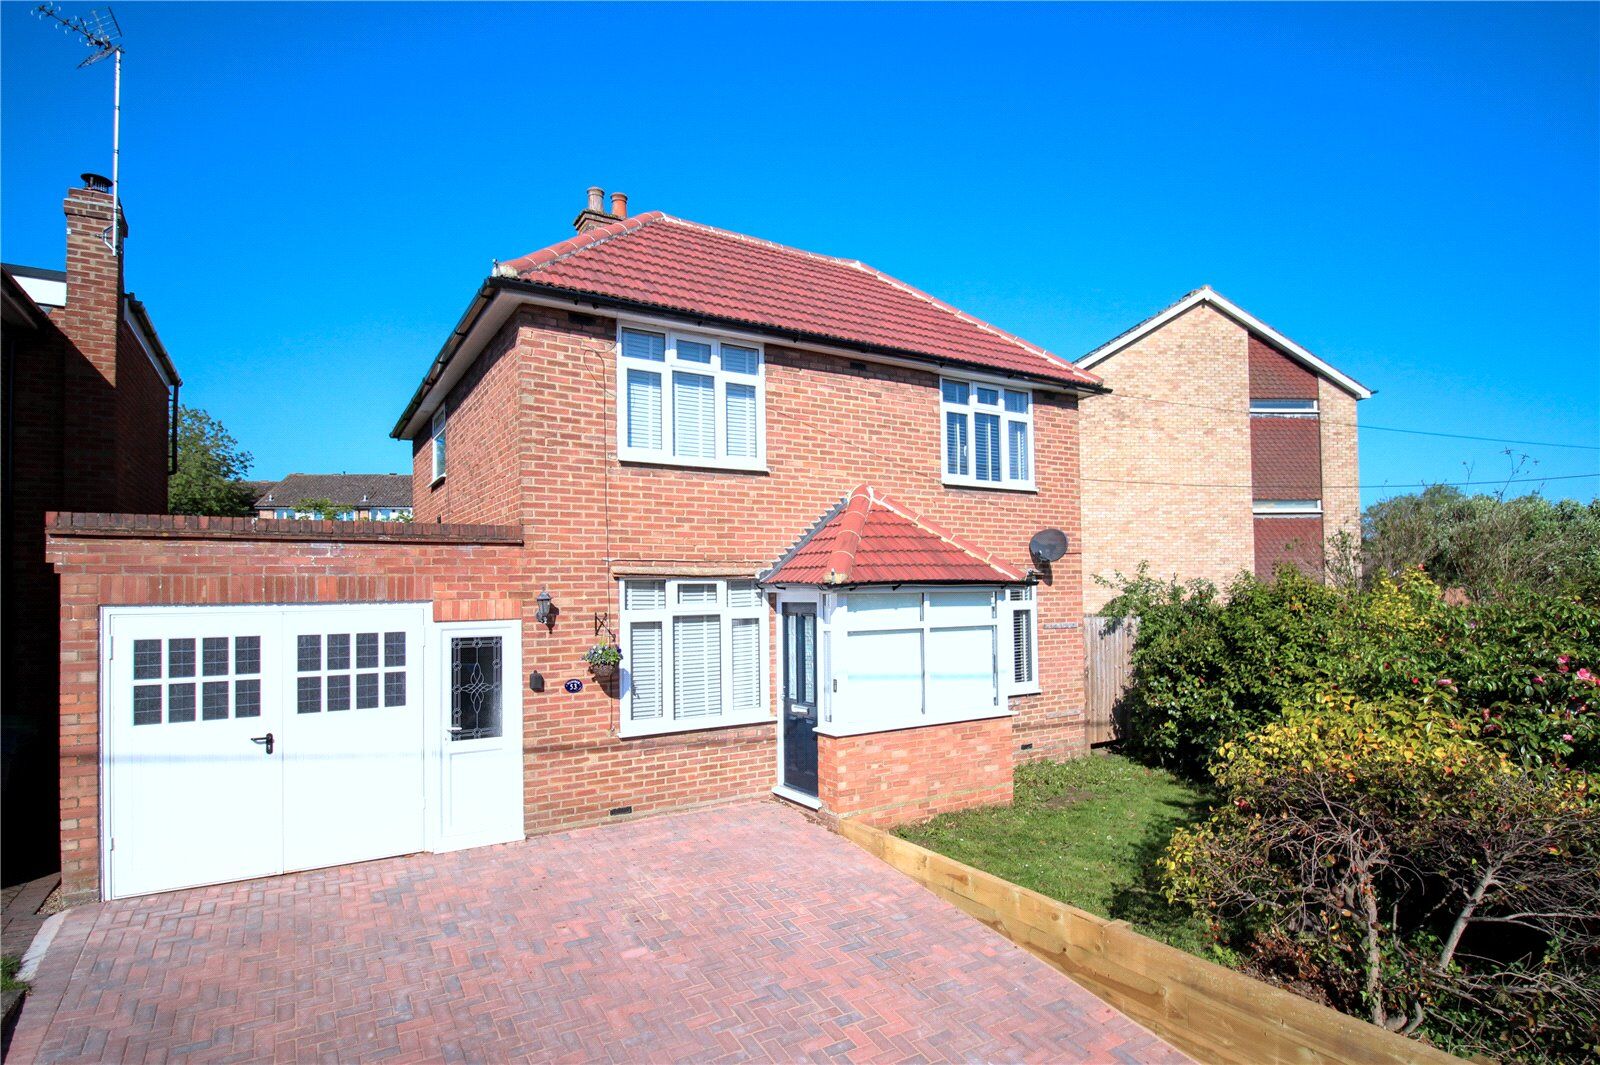 3 bedroom detached house for sale Plomer Green Lane, Downley, HP13, main image